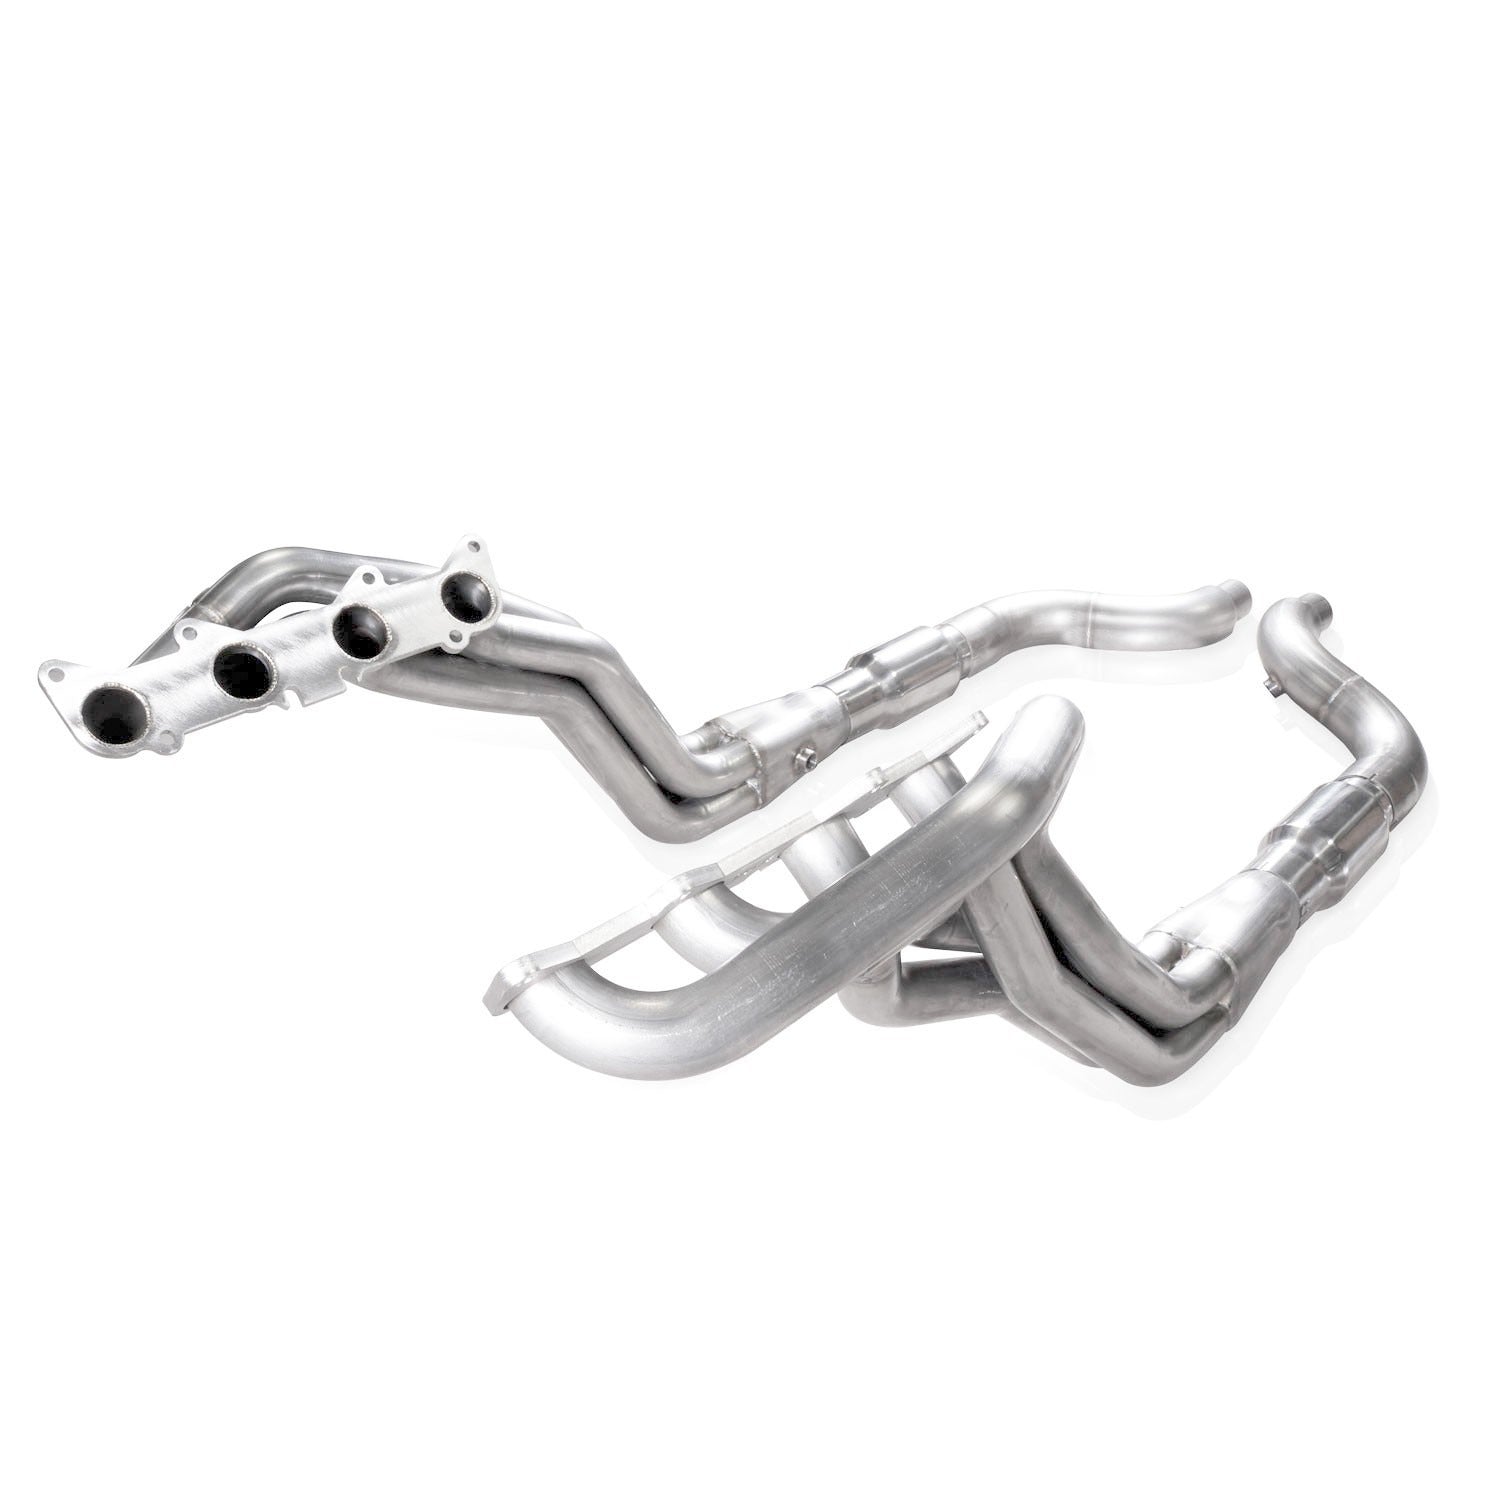 STAINLESS WORKS Mustang GT 5.0L 2015-2020 Headers w/ Factory Connect & Catalytic Converter (2015-2020 GT 5.0L ONLY)